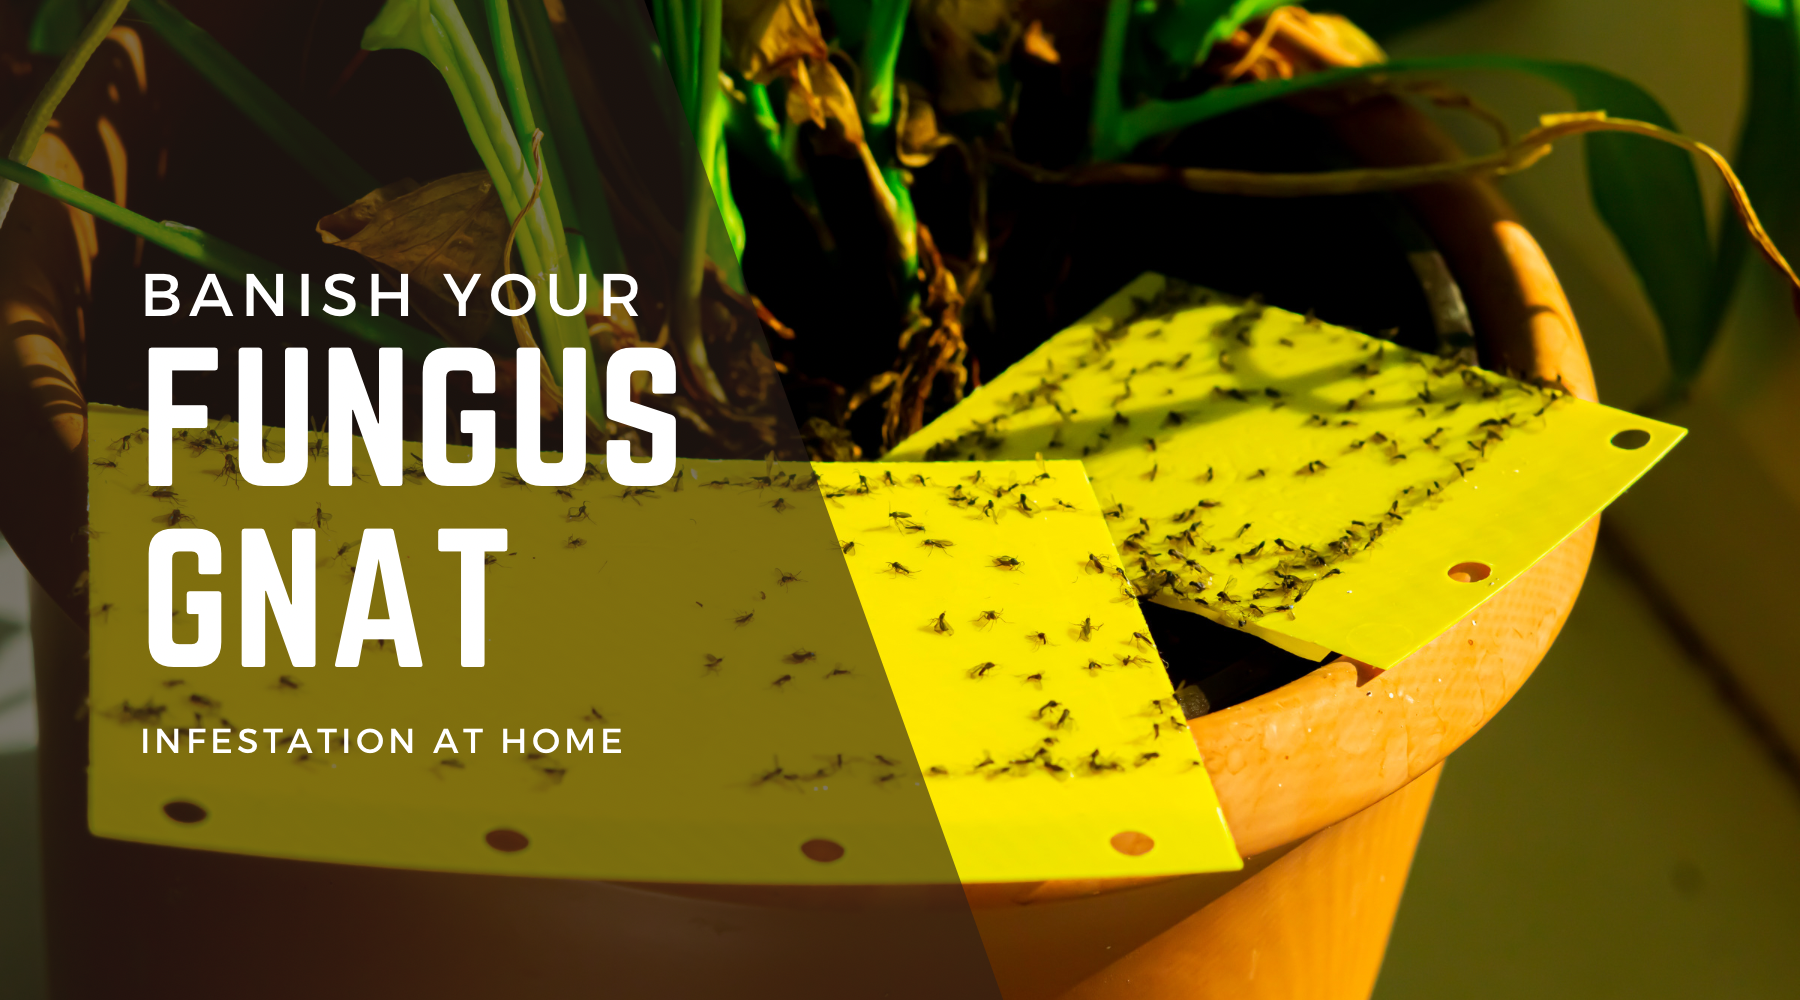 Banishing Fungus Gnats: A Simple Guide Using Mosquito Dunks and Sticky Sticks